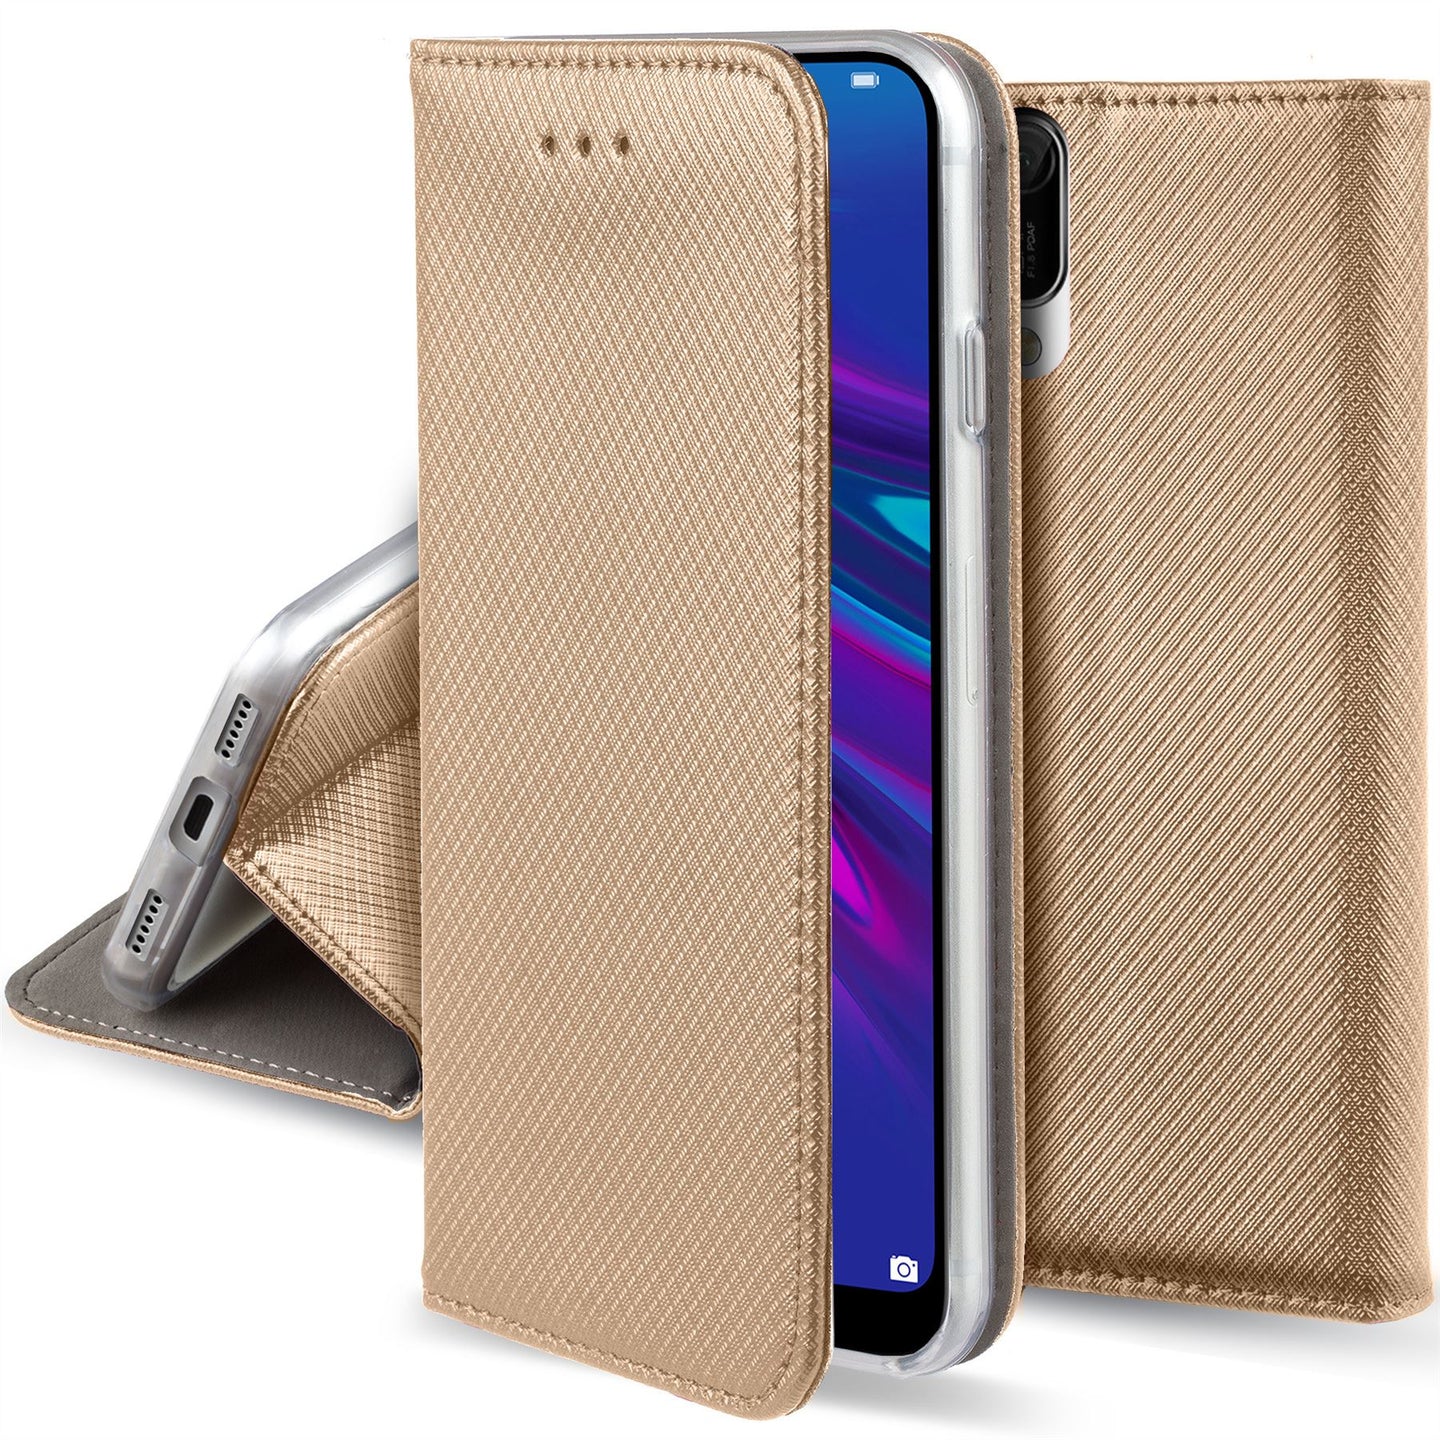 Moozy Case Flip Cover for Huawei Y6 2019, Gold - Smart Magnetic Flip Case with Card Holder and Stand